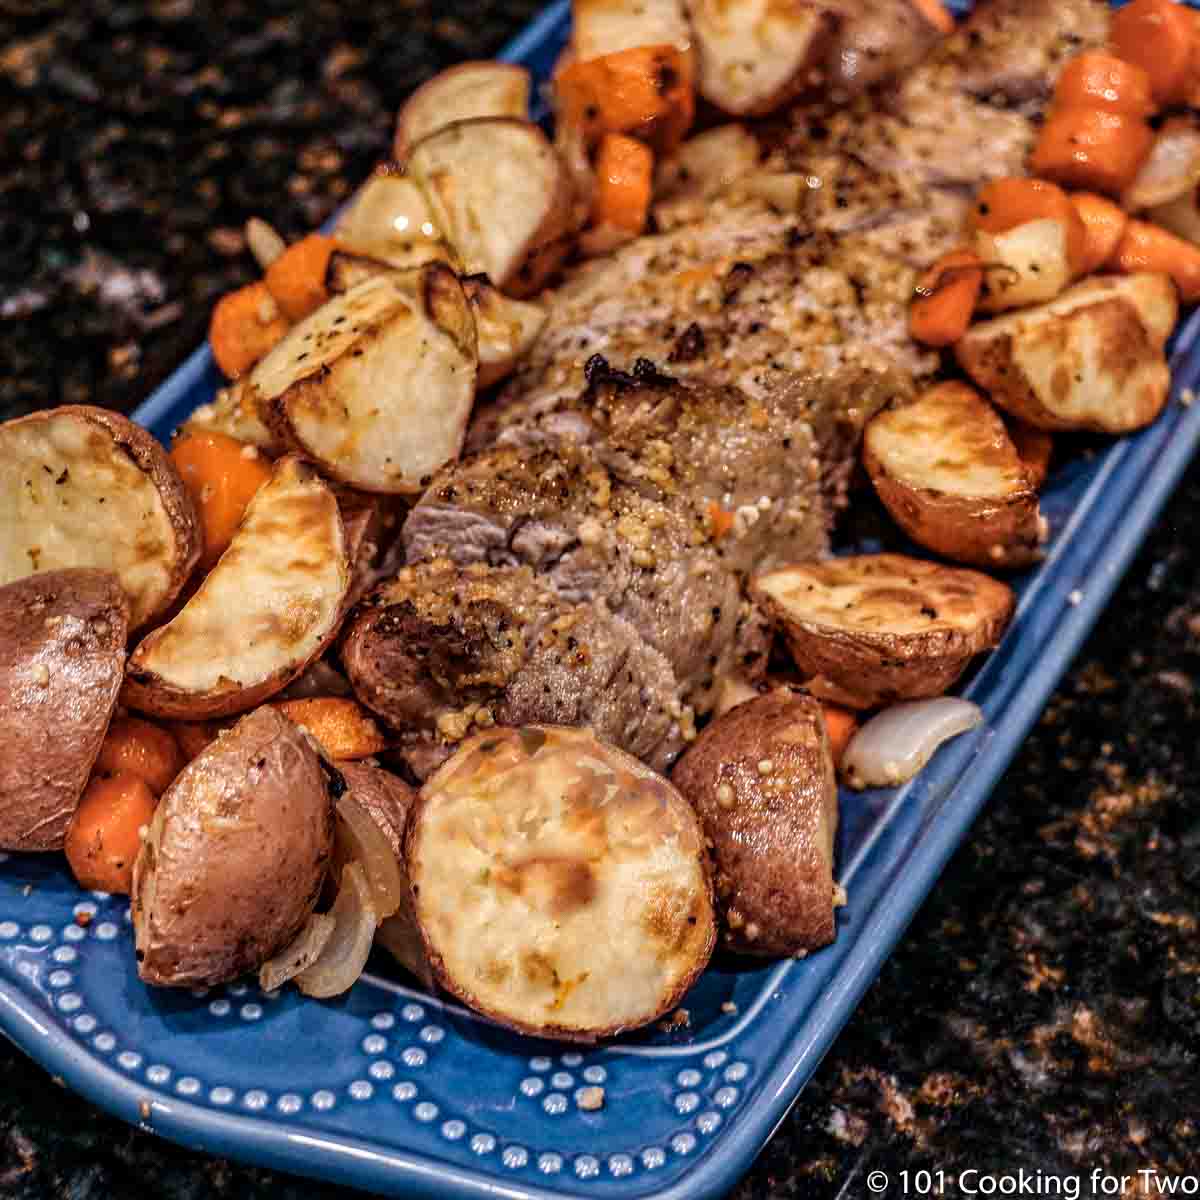 One Pan Roasted Pork Tenderloin With Potatoes And Carrots 101 Cooking For Two,Rolled Stuffed Pork Loin